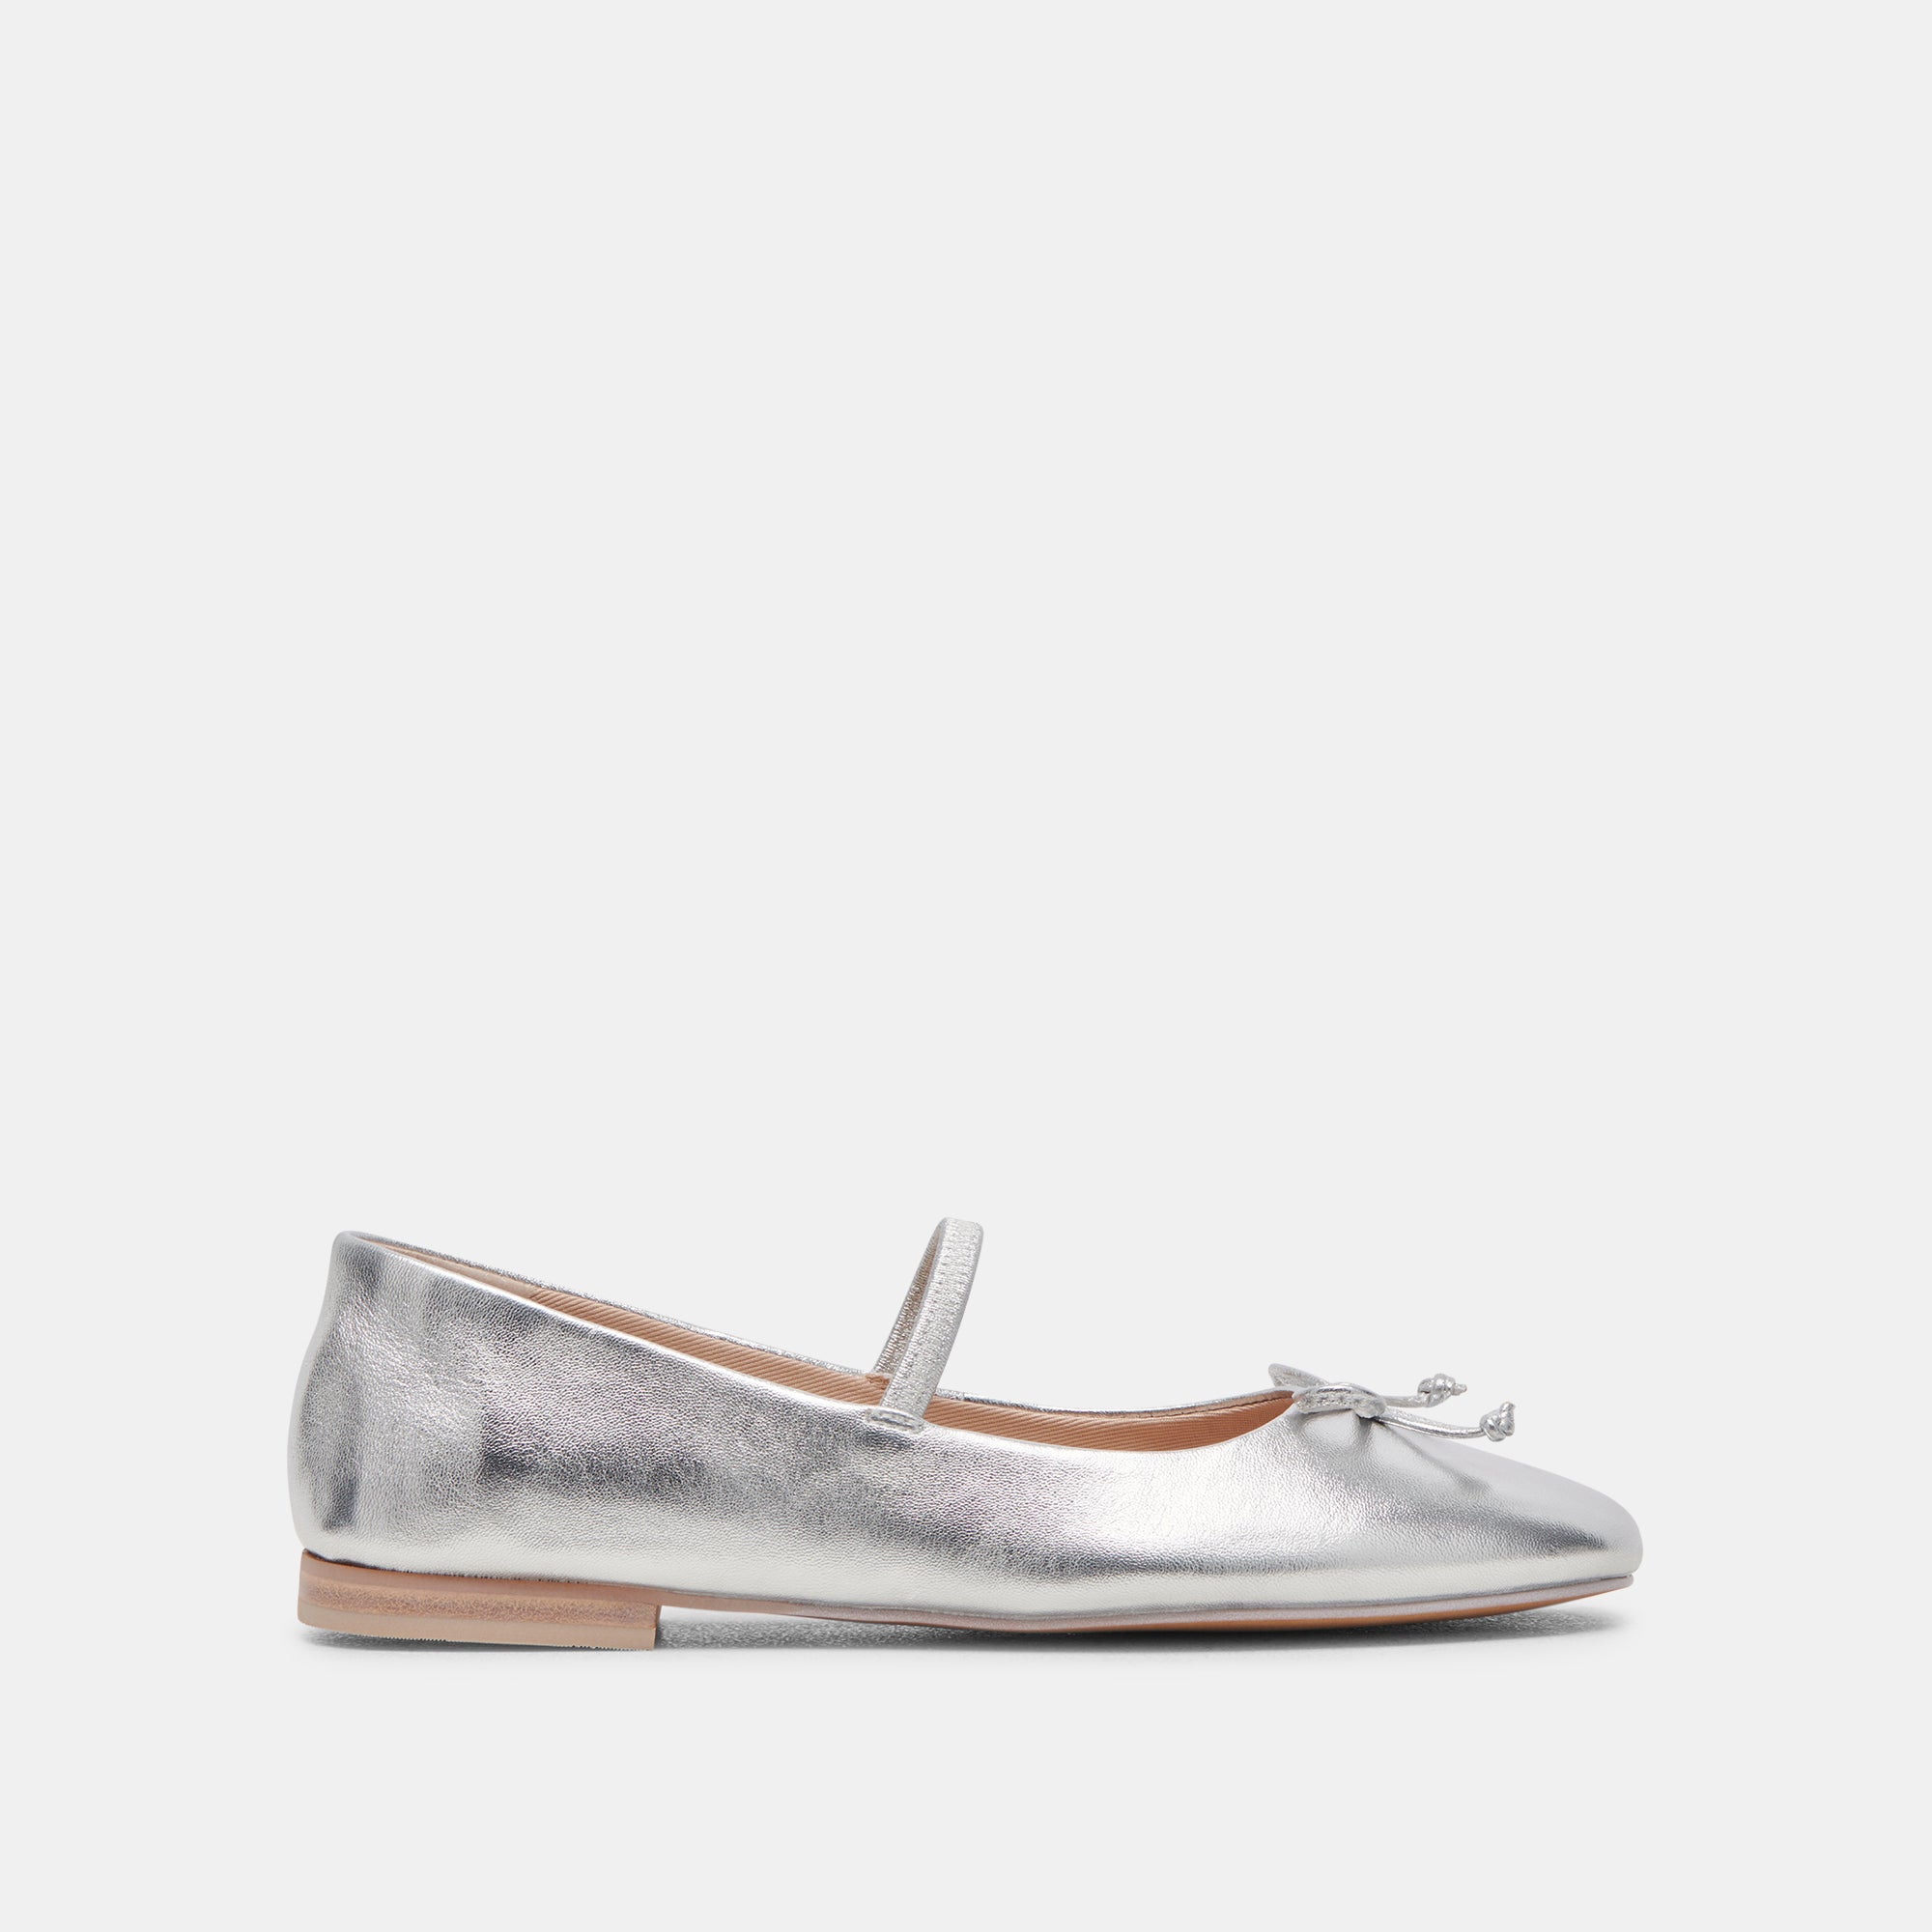 Carin Ballet Flats Silver Metallic Leather | Leather Ballet Flats ...